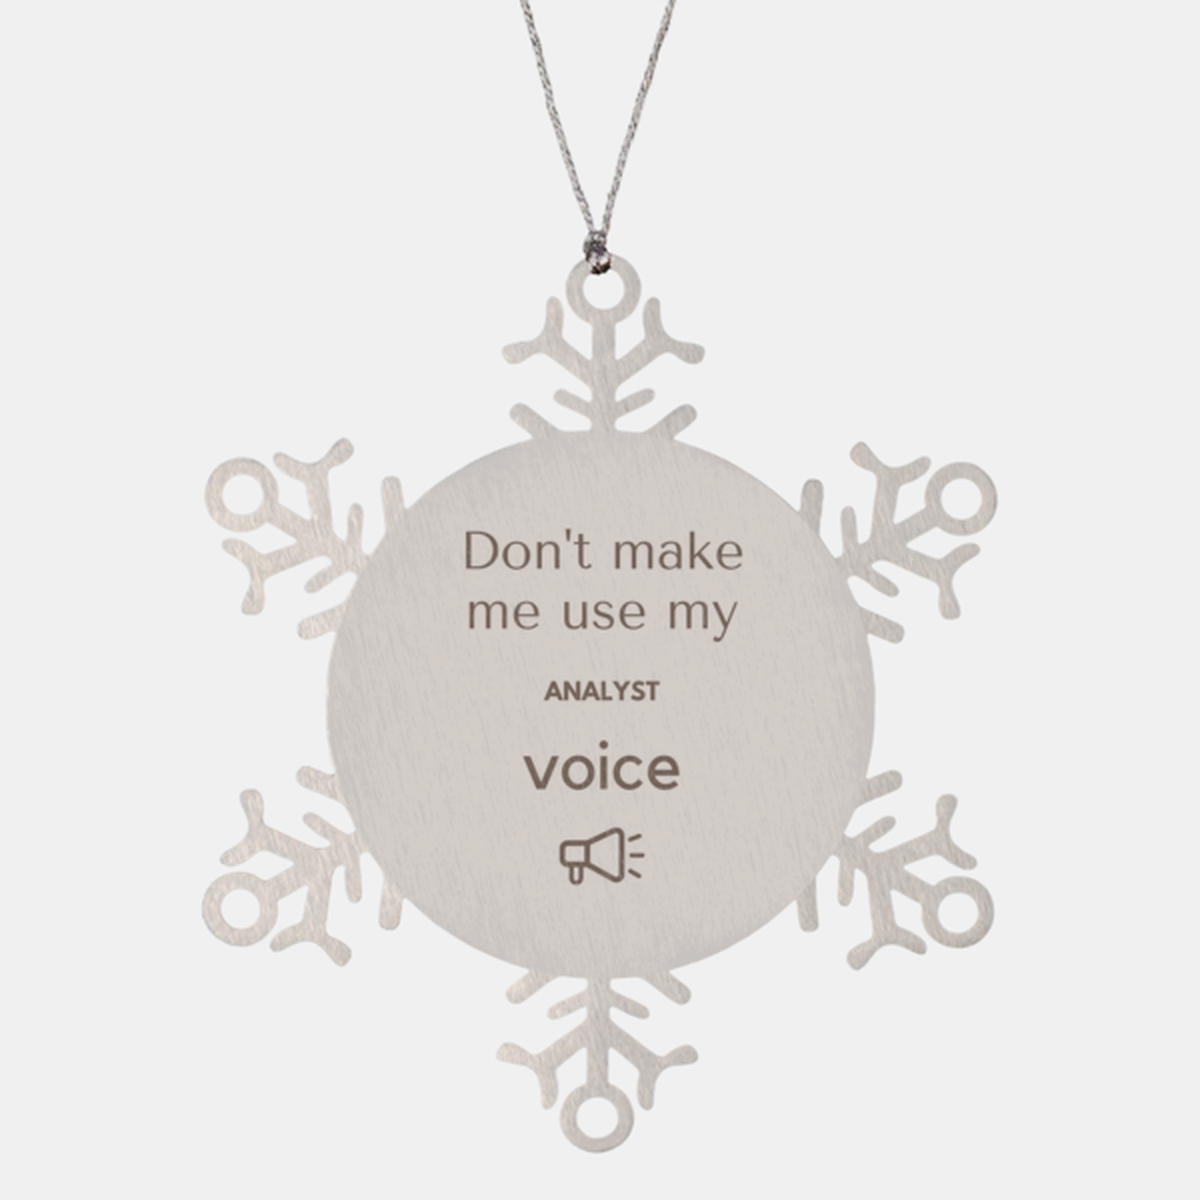 Don't make me use my Analyst voice, Sarcasm Analyst Ornament Gifts, Christmas Analyst Snowflake Ornament Unique Gifts For Analyst Coworkers, Men, Women, Colleague, Friends